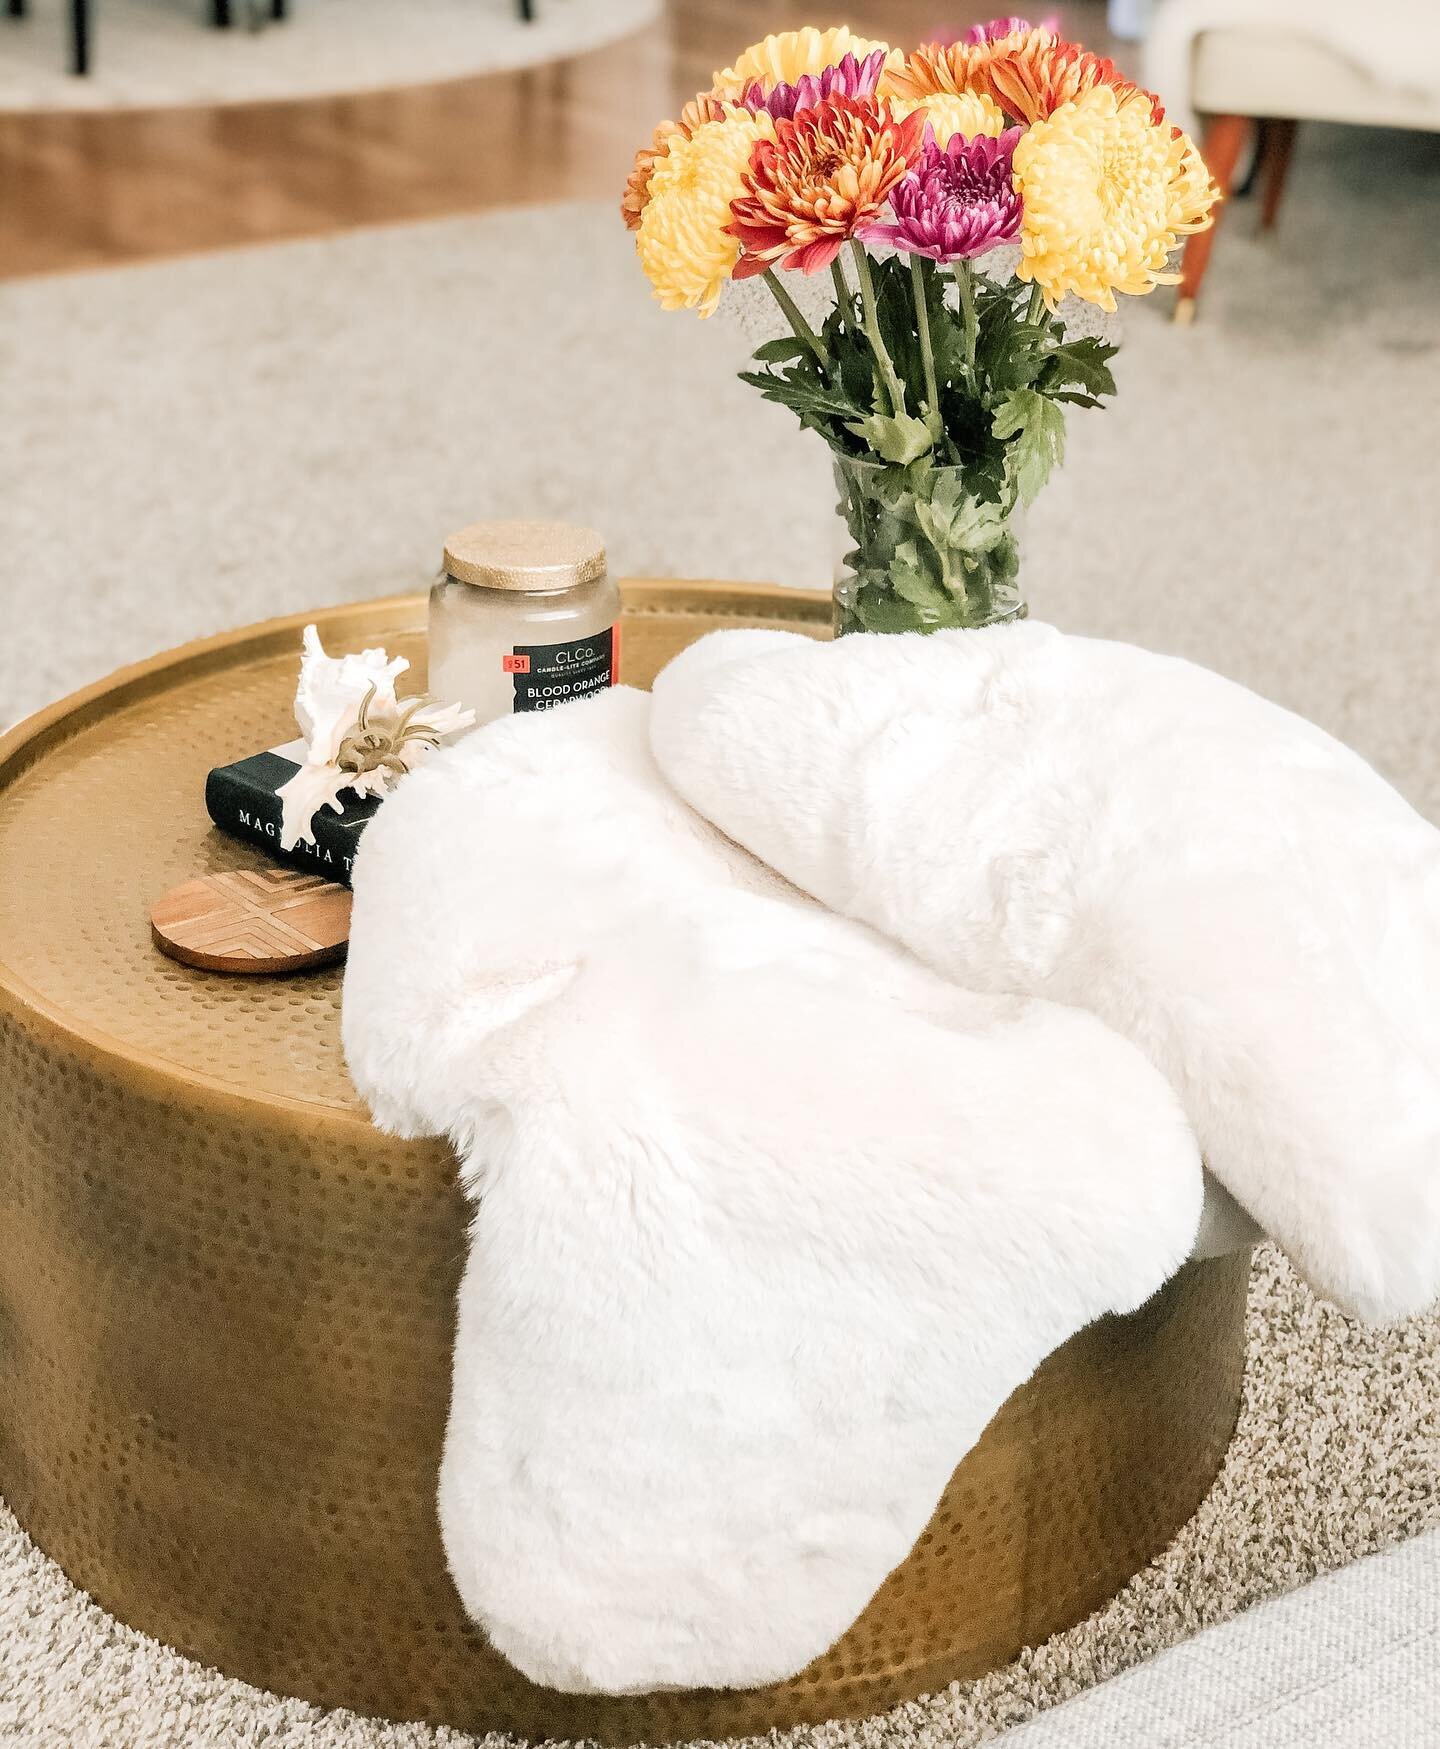 Crushing on my wedding anniversary gifts from my sweet hubby! He got me the prettiest fall flowers and the SOFTEST faux fur rug that I have been crushing over since I spotted it at a boutique over the summer 😍